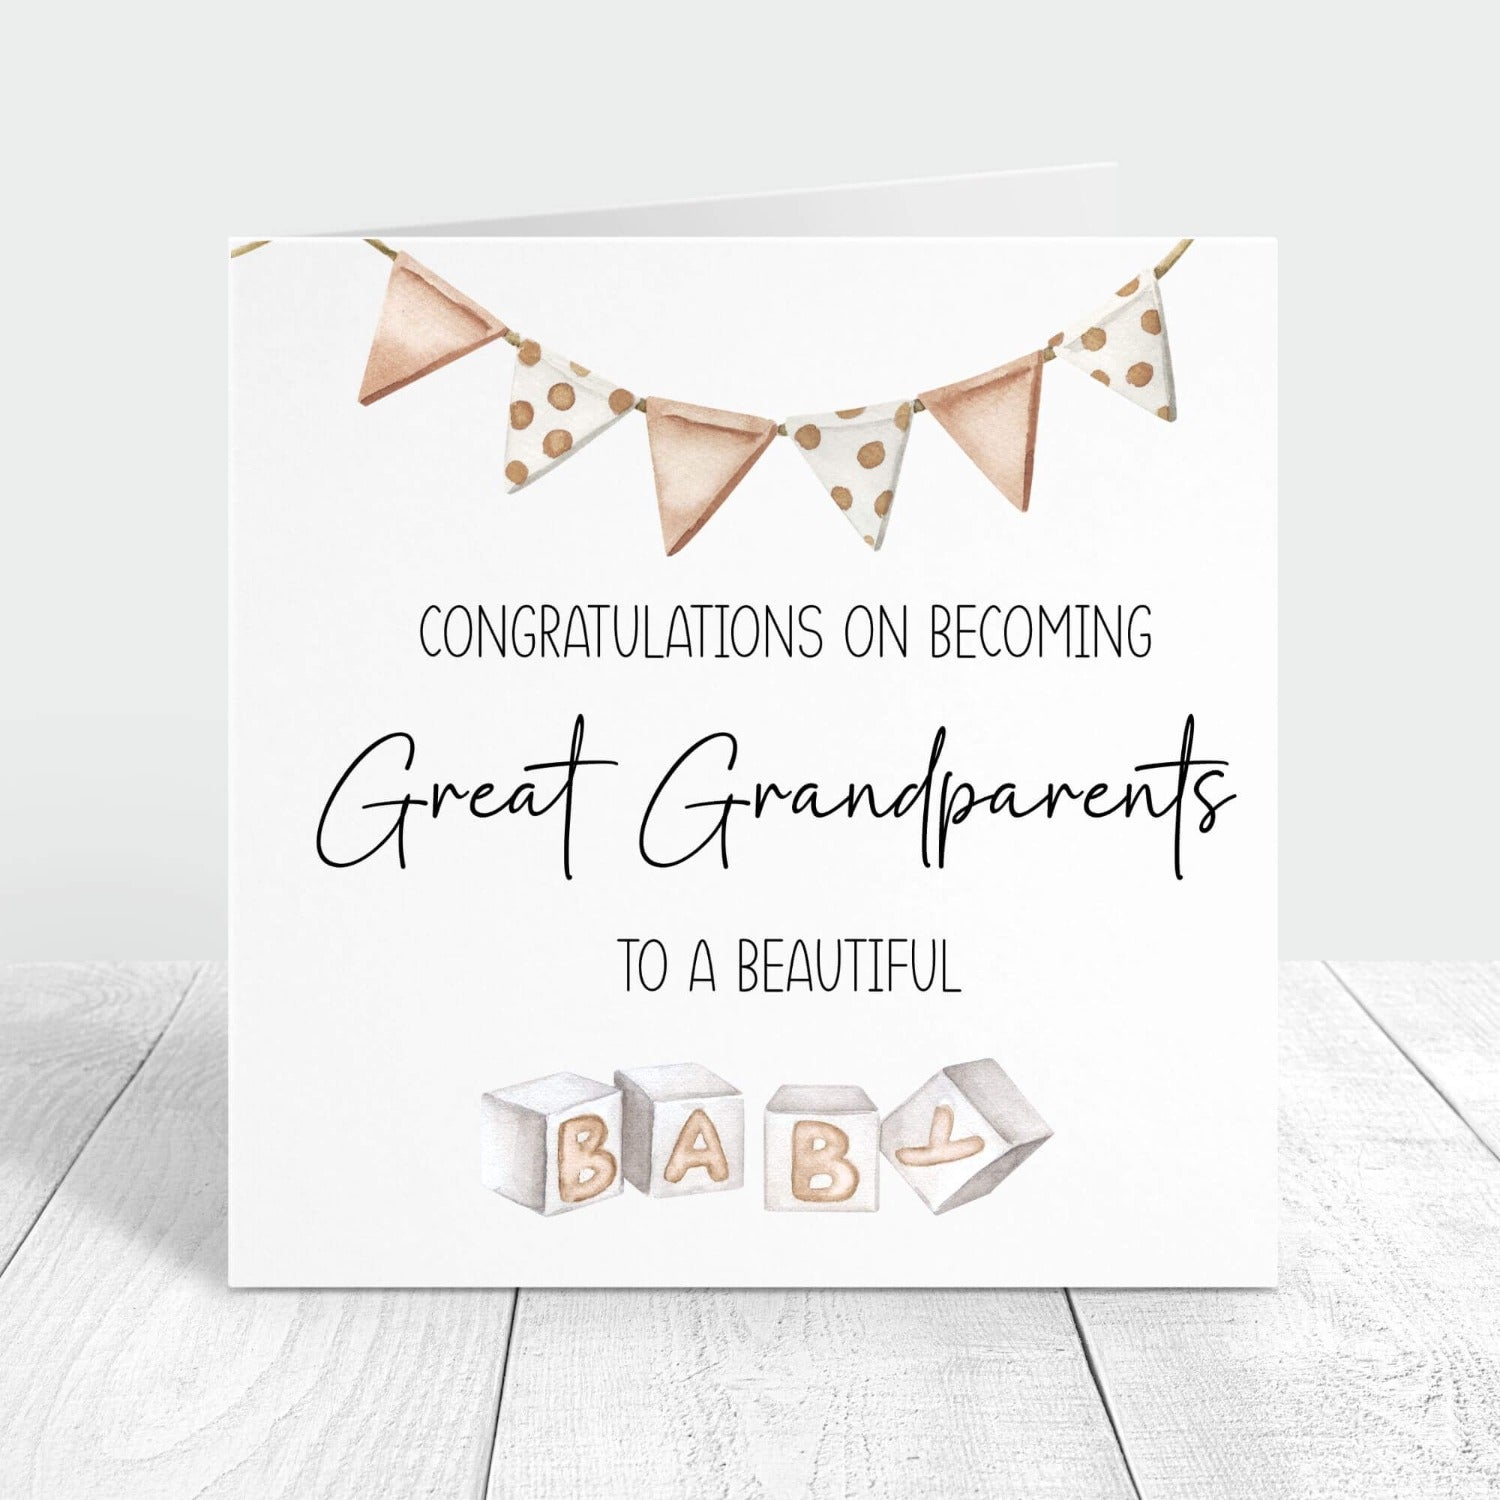 congratulations on becoming great grandparents personalised card